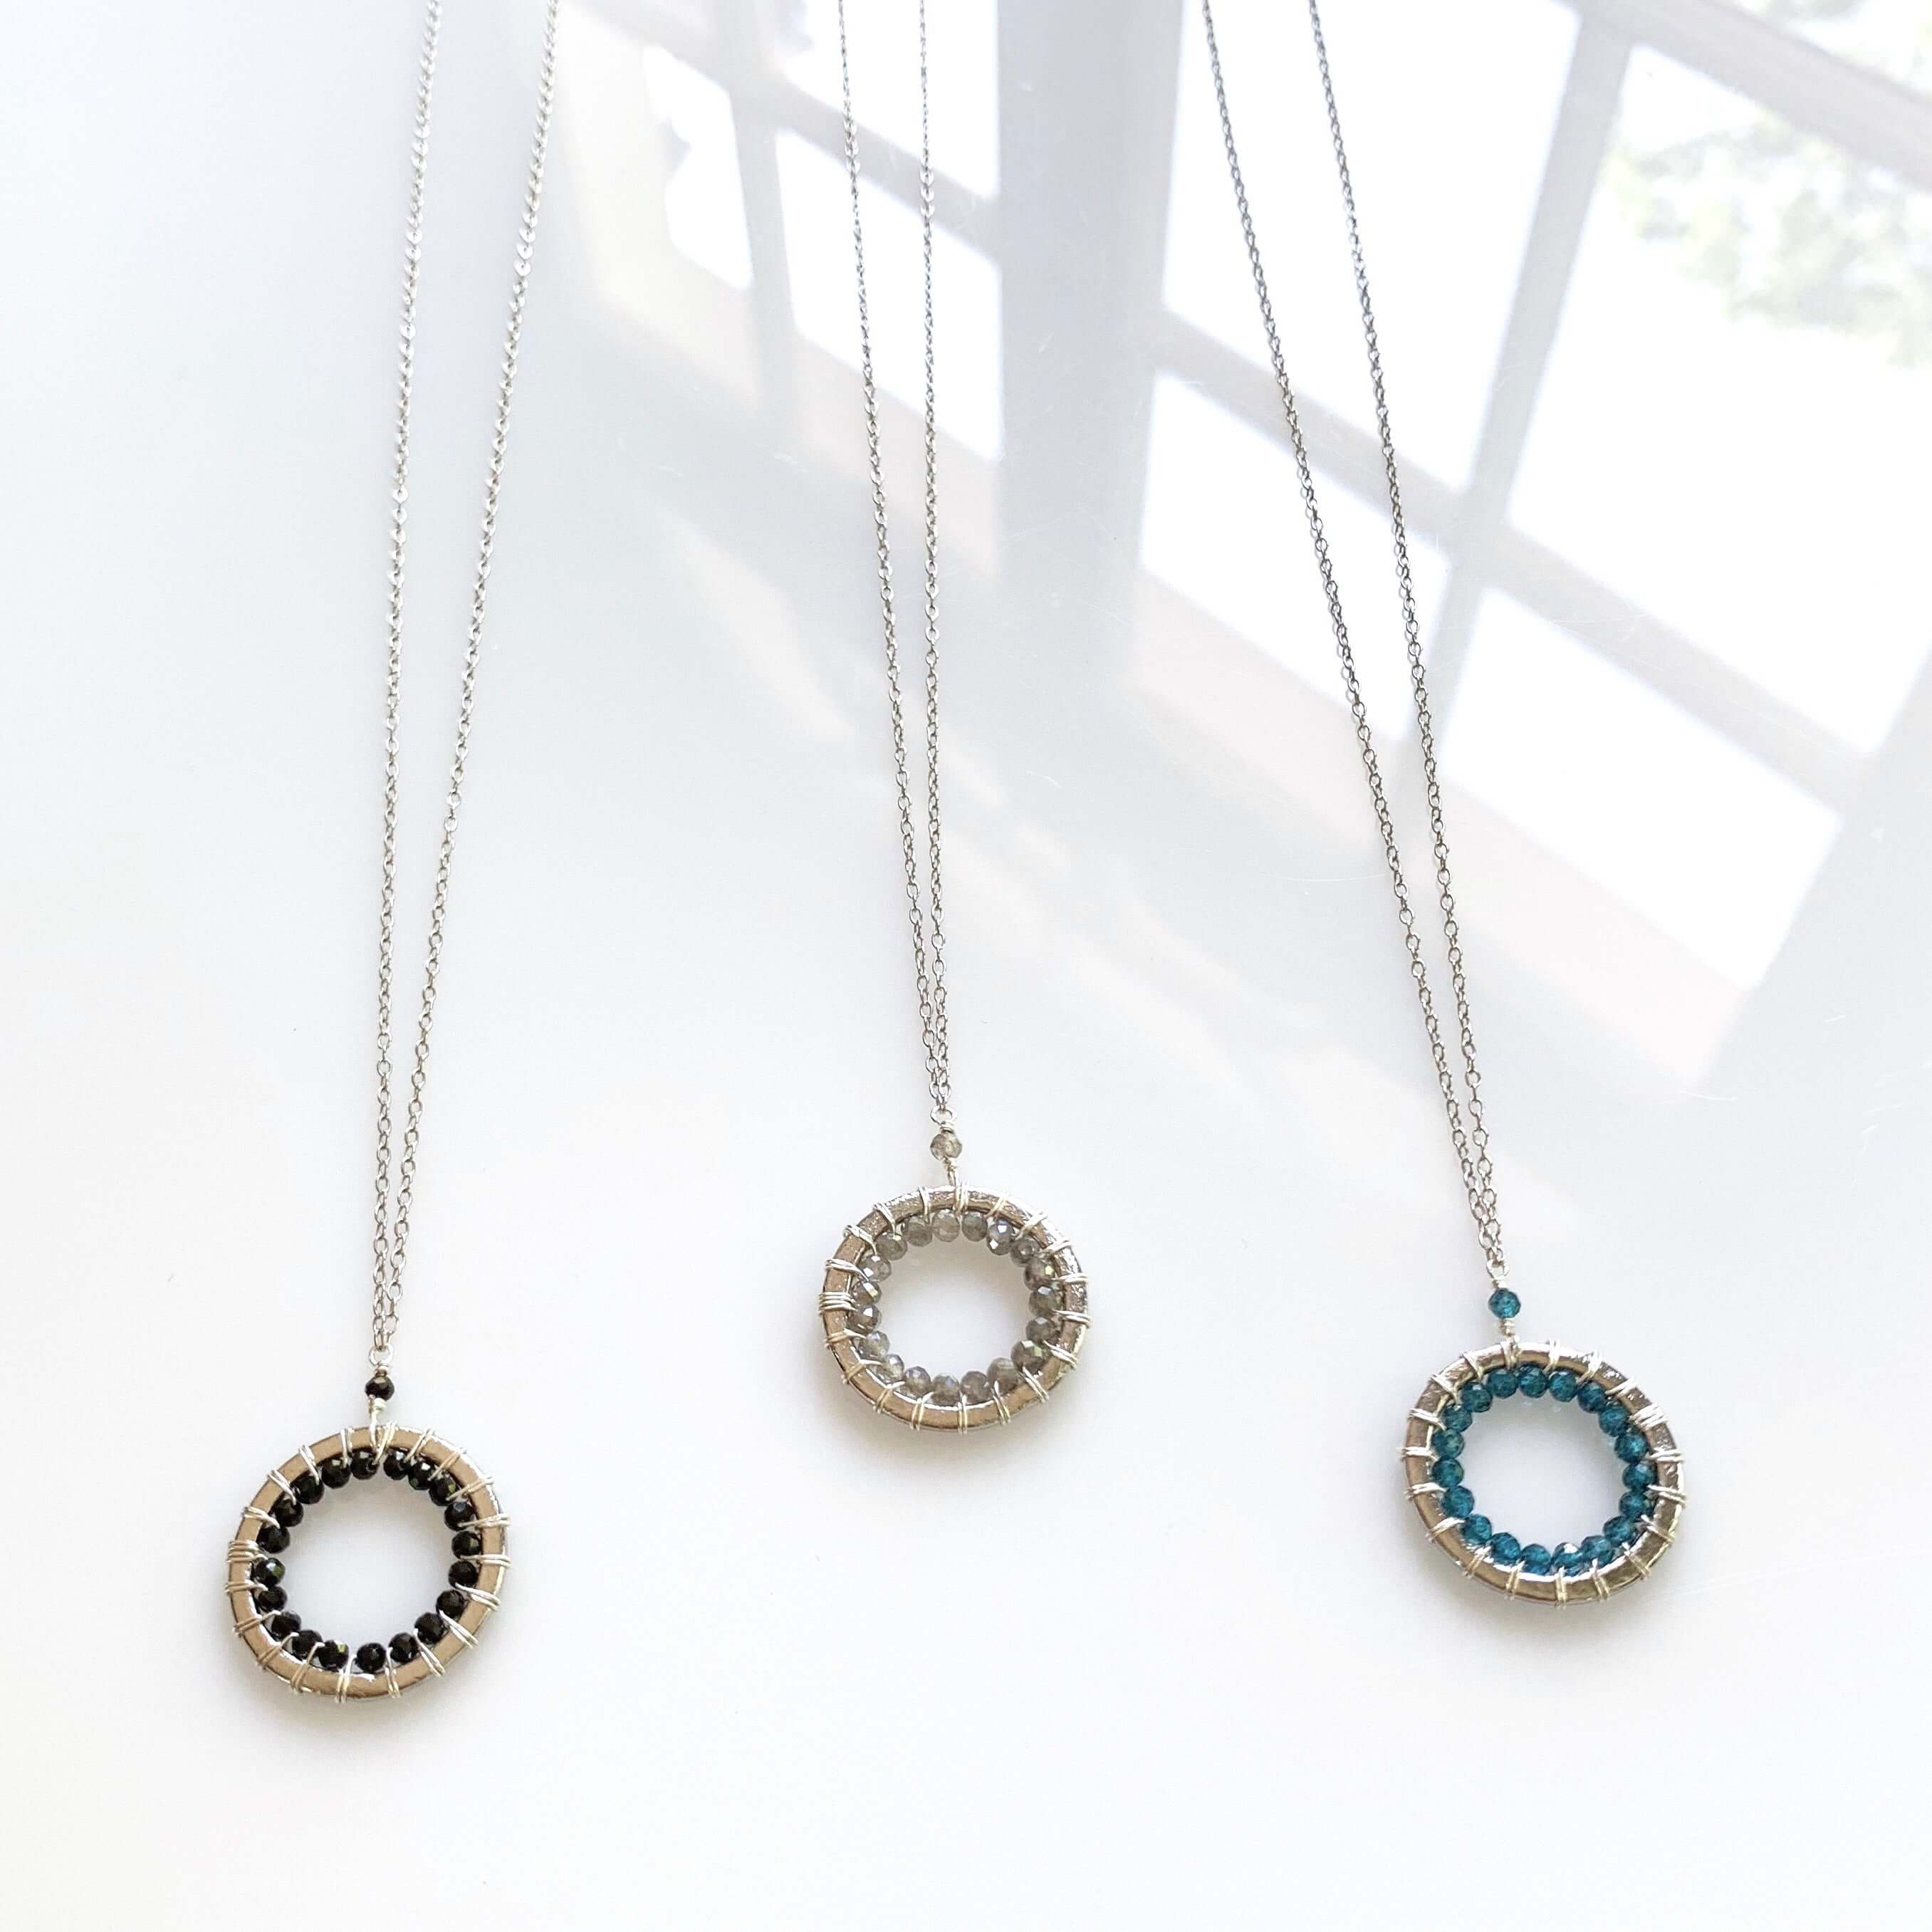 Small Silver Gemstone Circle Necklaces